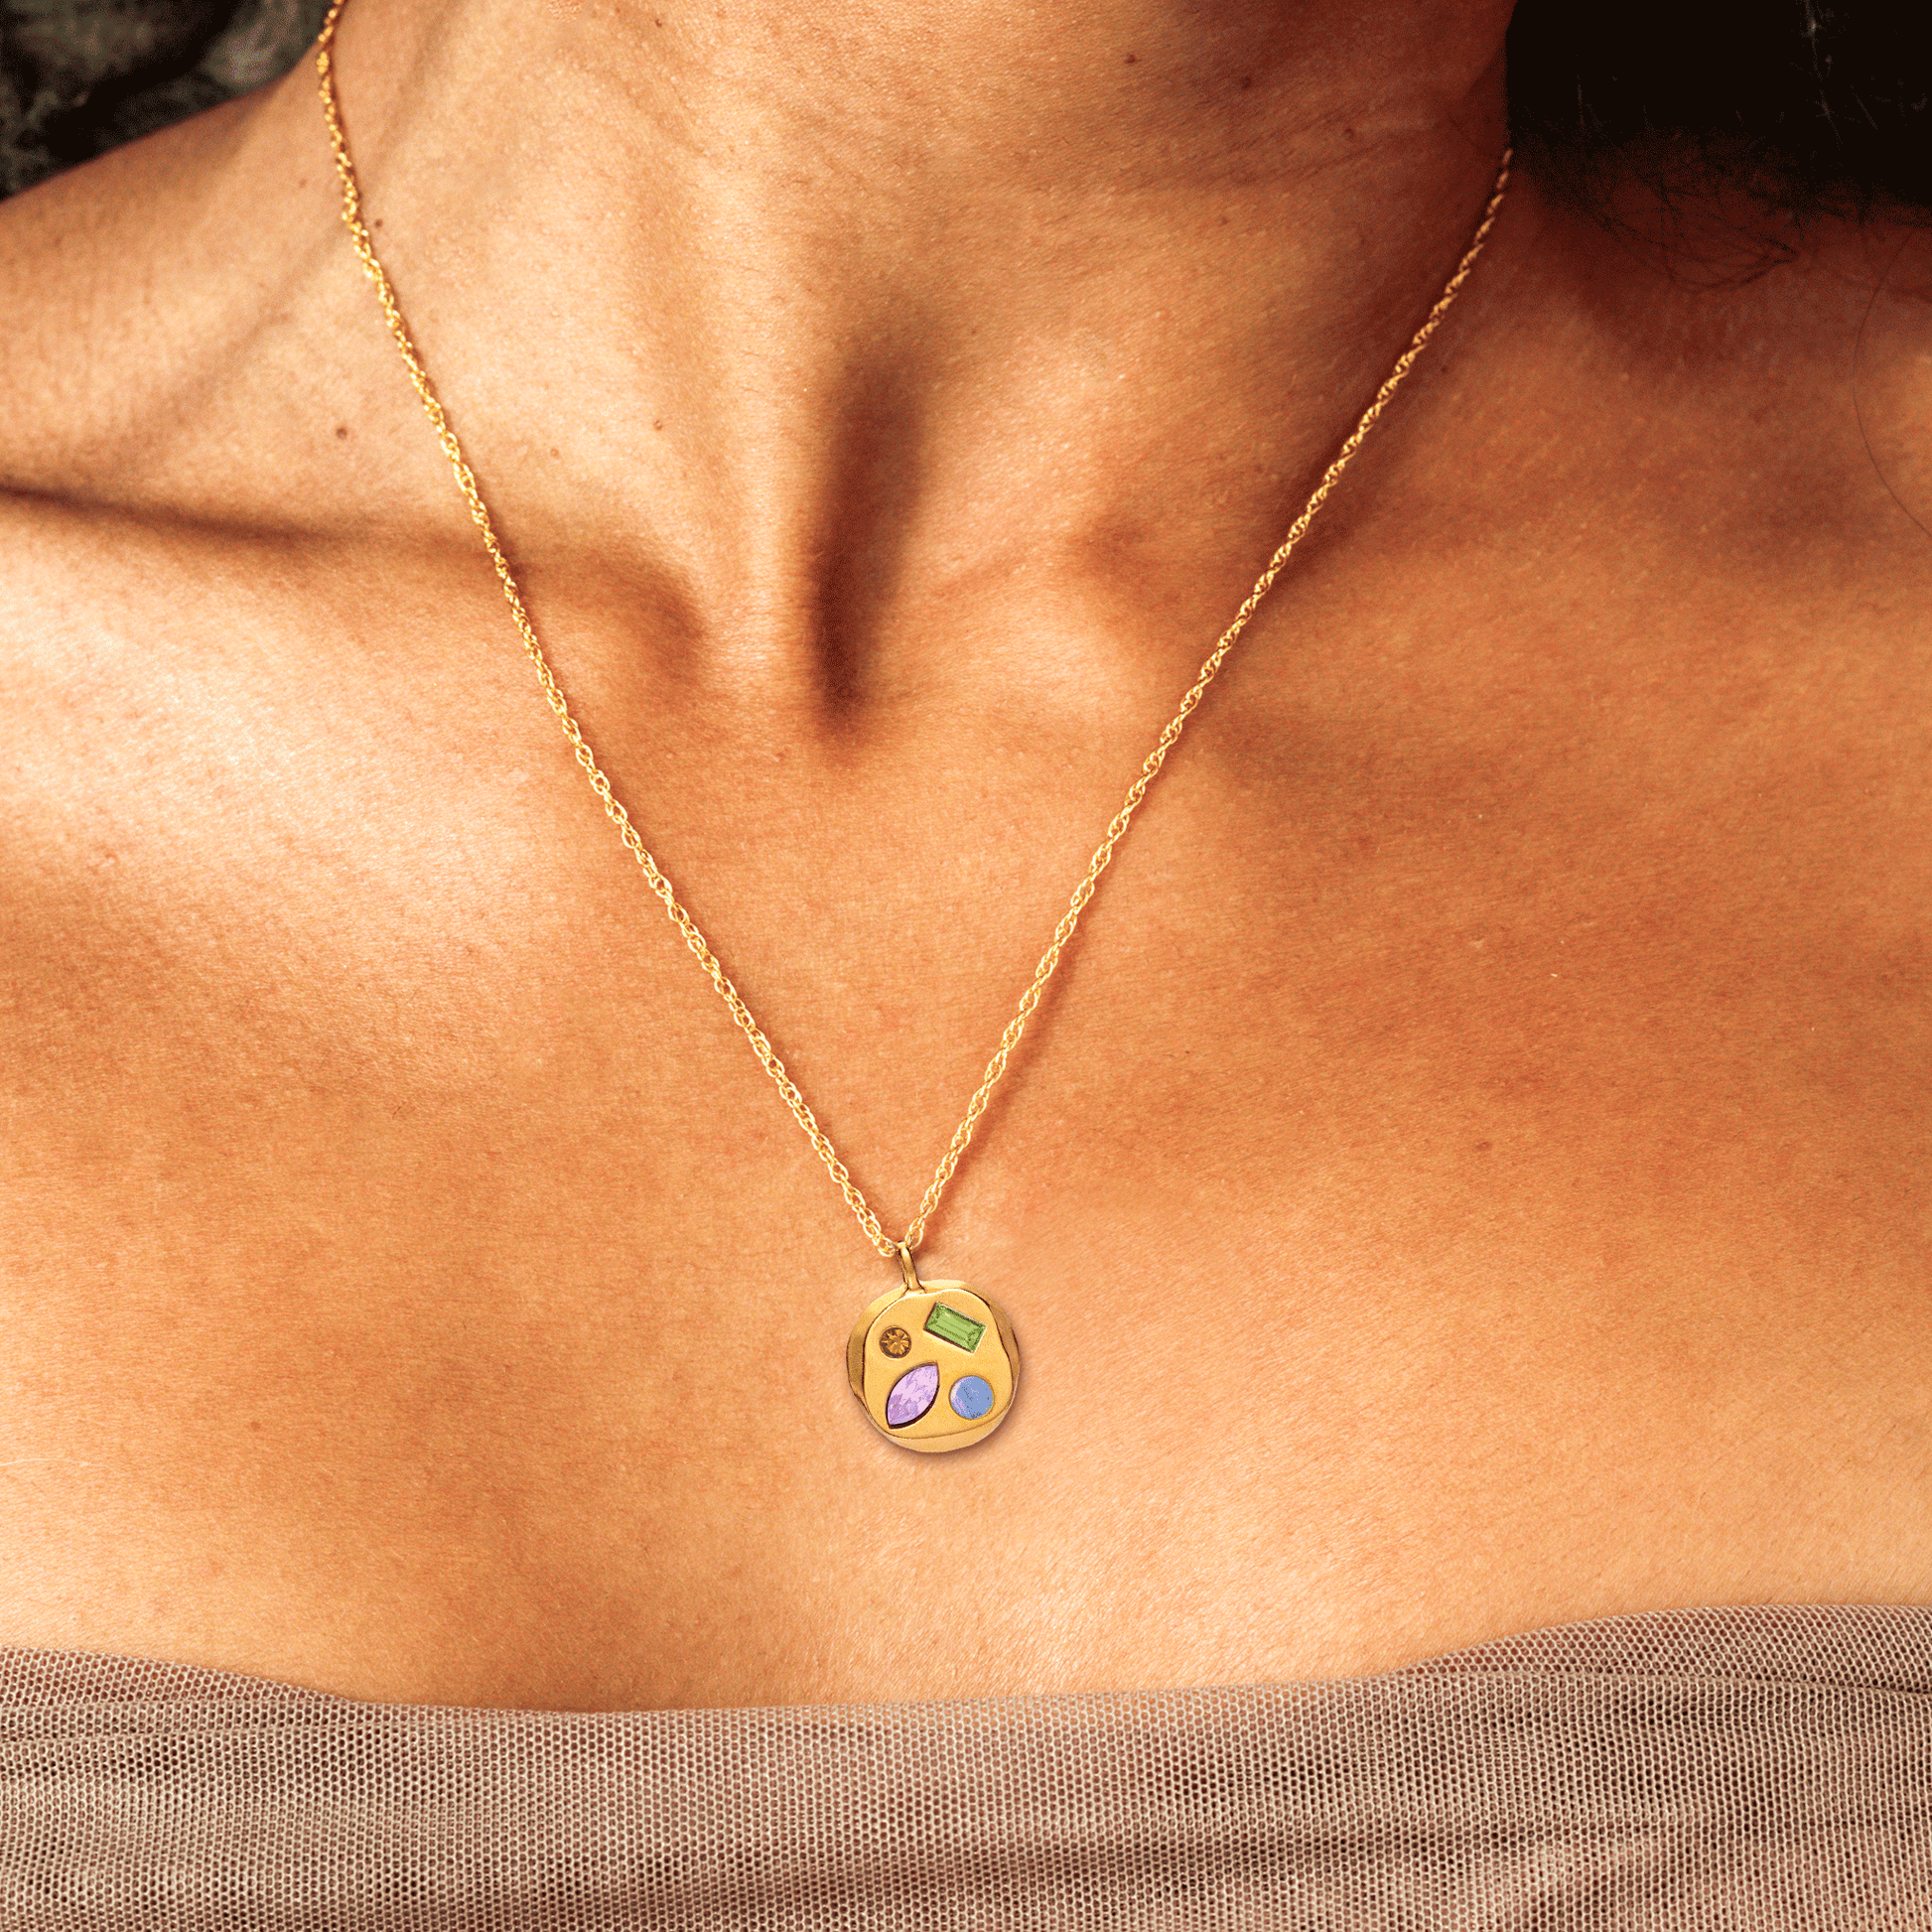 Person wearing The February Tenth Pendant